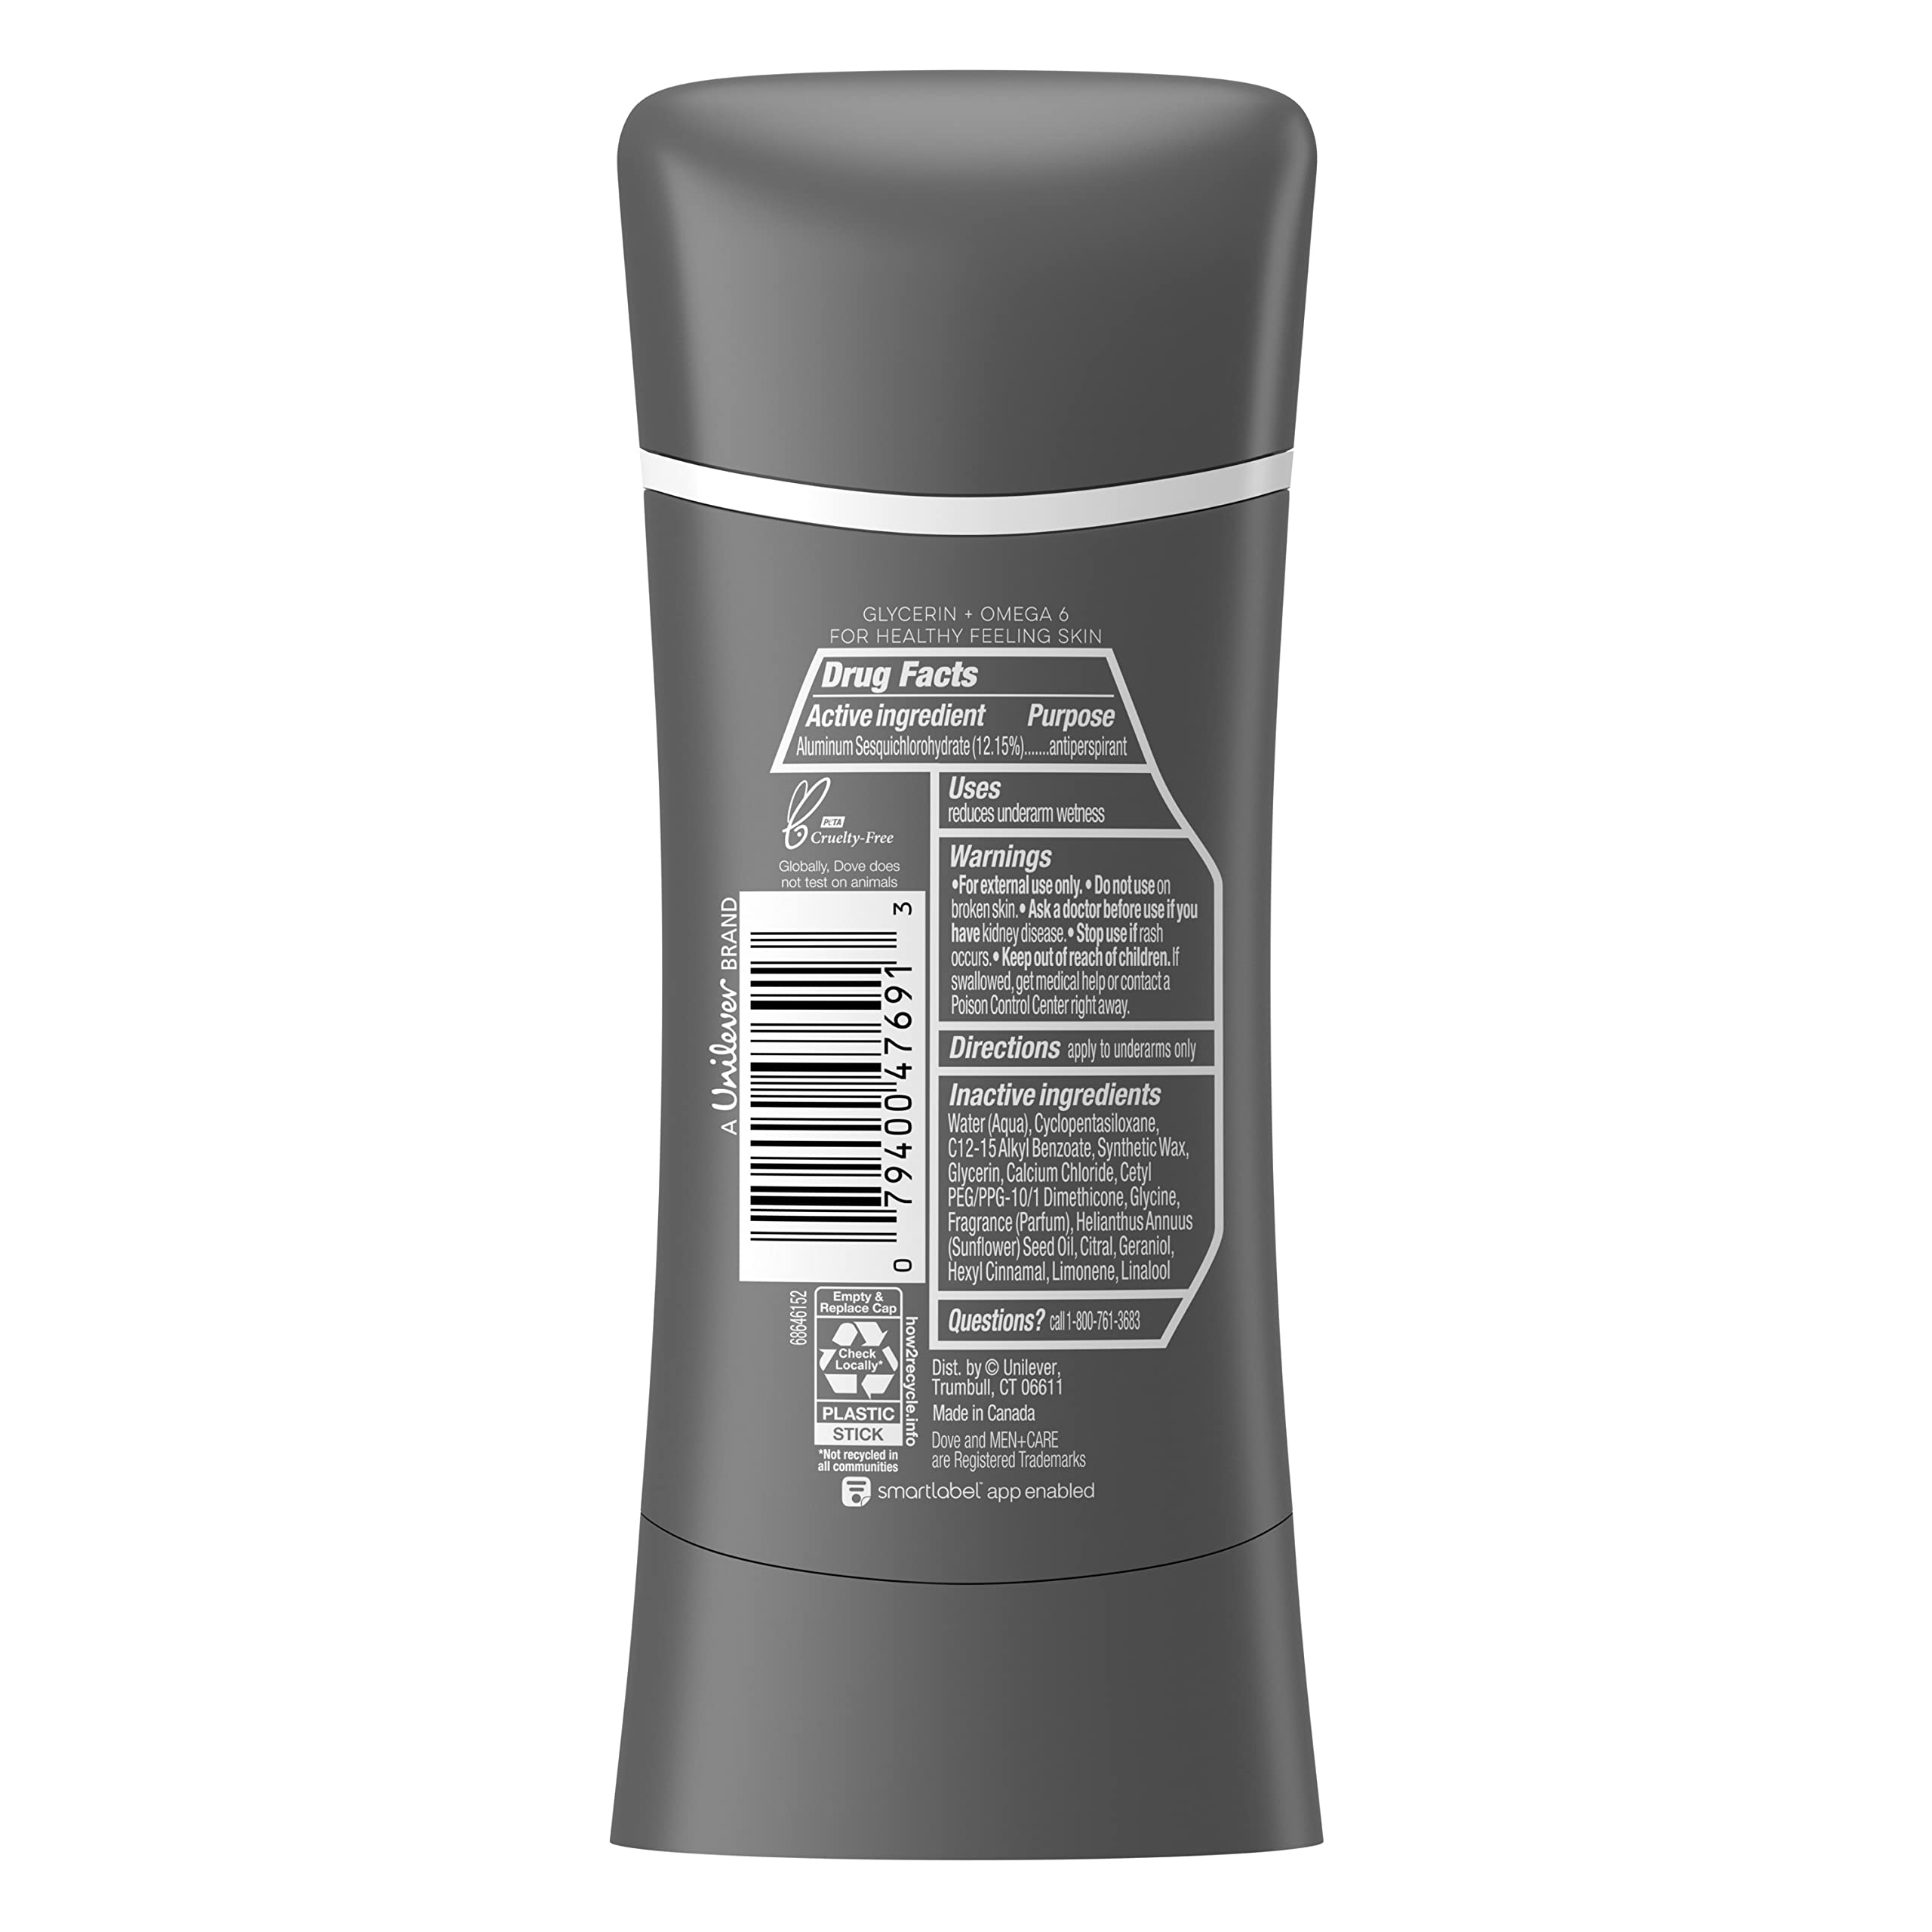 Dove Men+Care Antiperspirant hydrating, water-based deodorant Juniper Woods with our best non-irritant formula 2.6 oz 2 Count